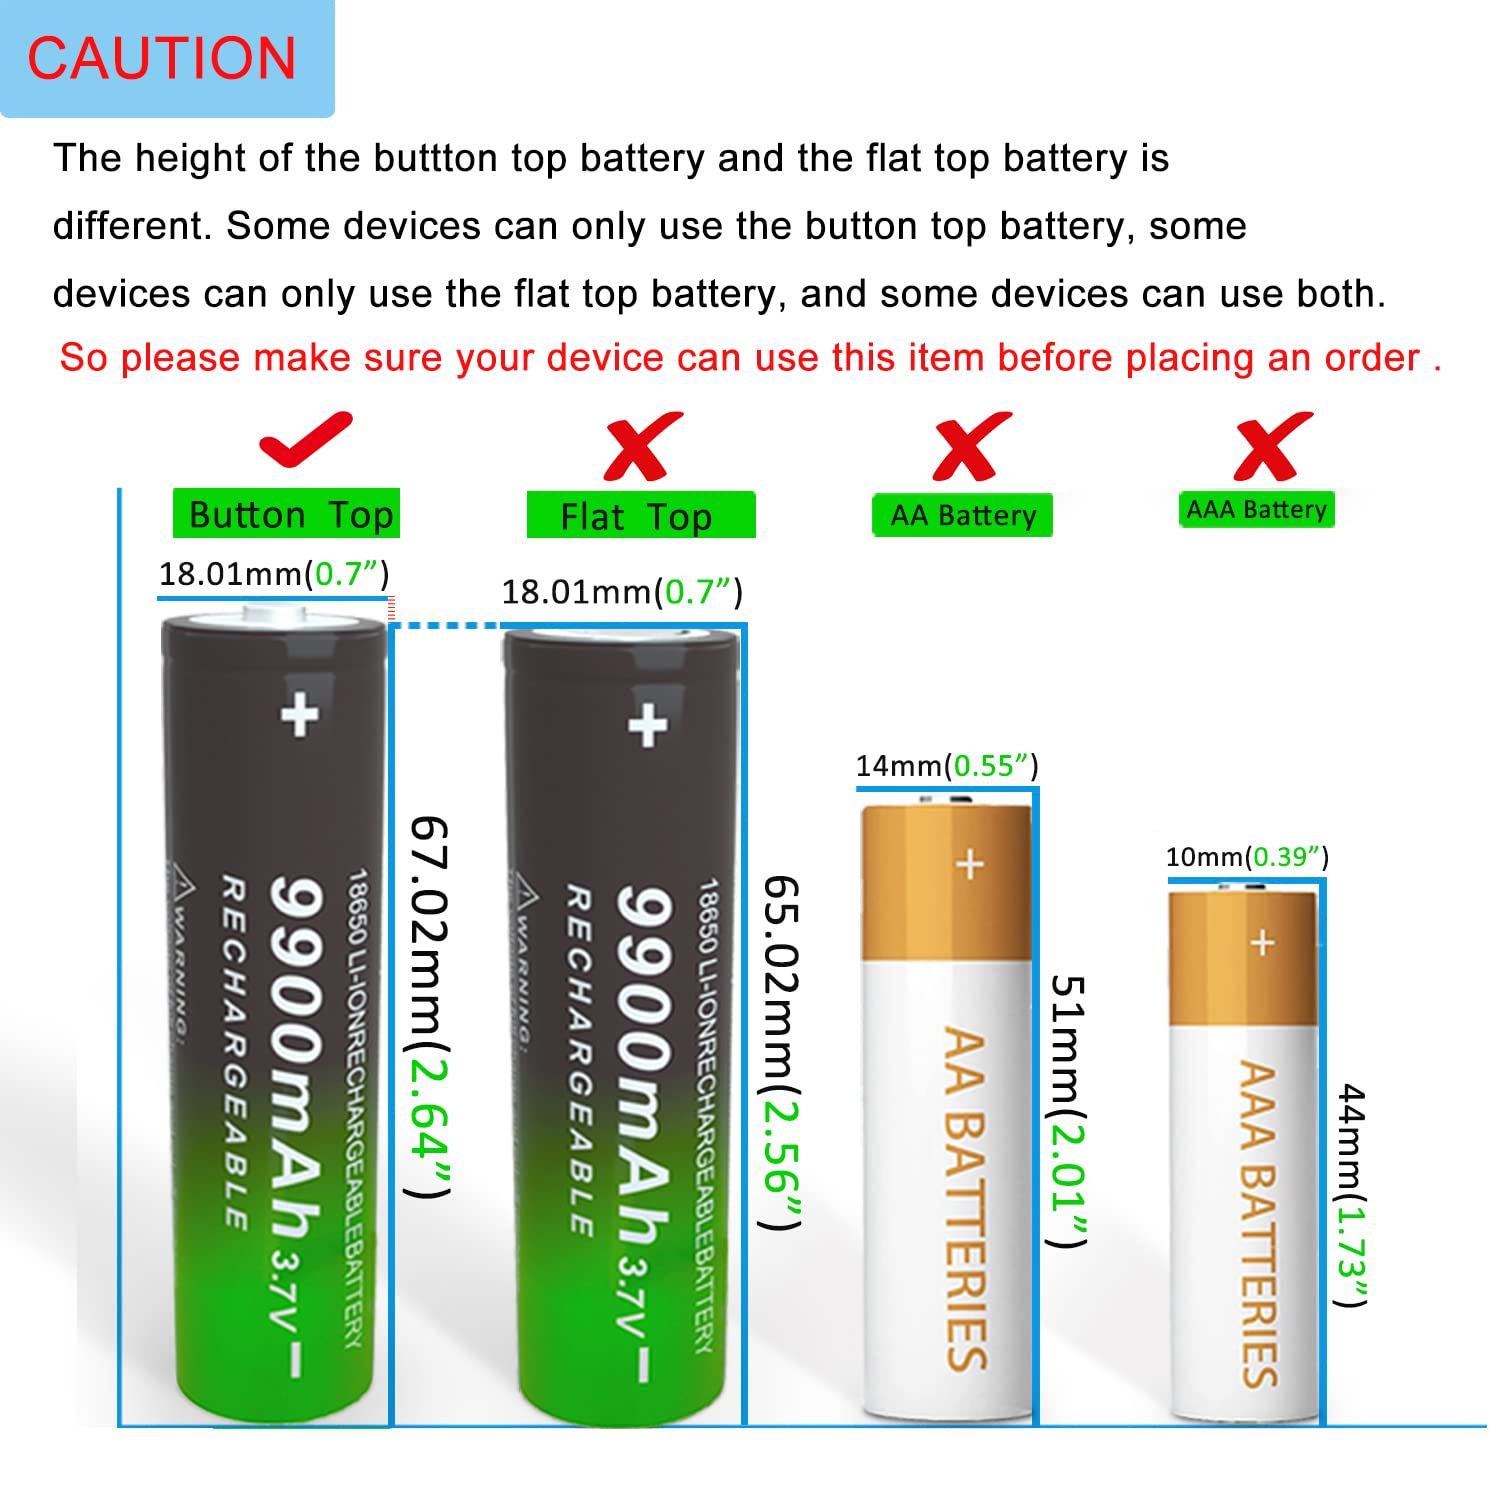 CPZZ 18650 Rechargeable Battery Lithium 3.7 Volt, 18650 Battery 9900mAh Button top 3.7V Battery for Path Lights,flashlights,Toy，doorbells(4pack)